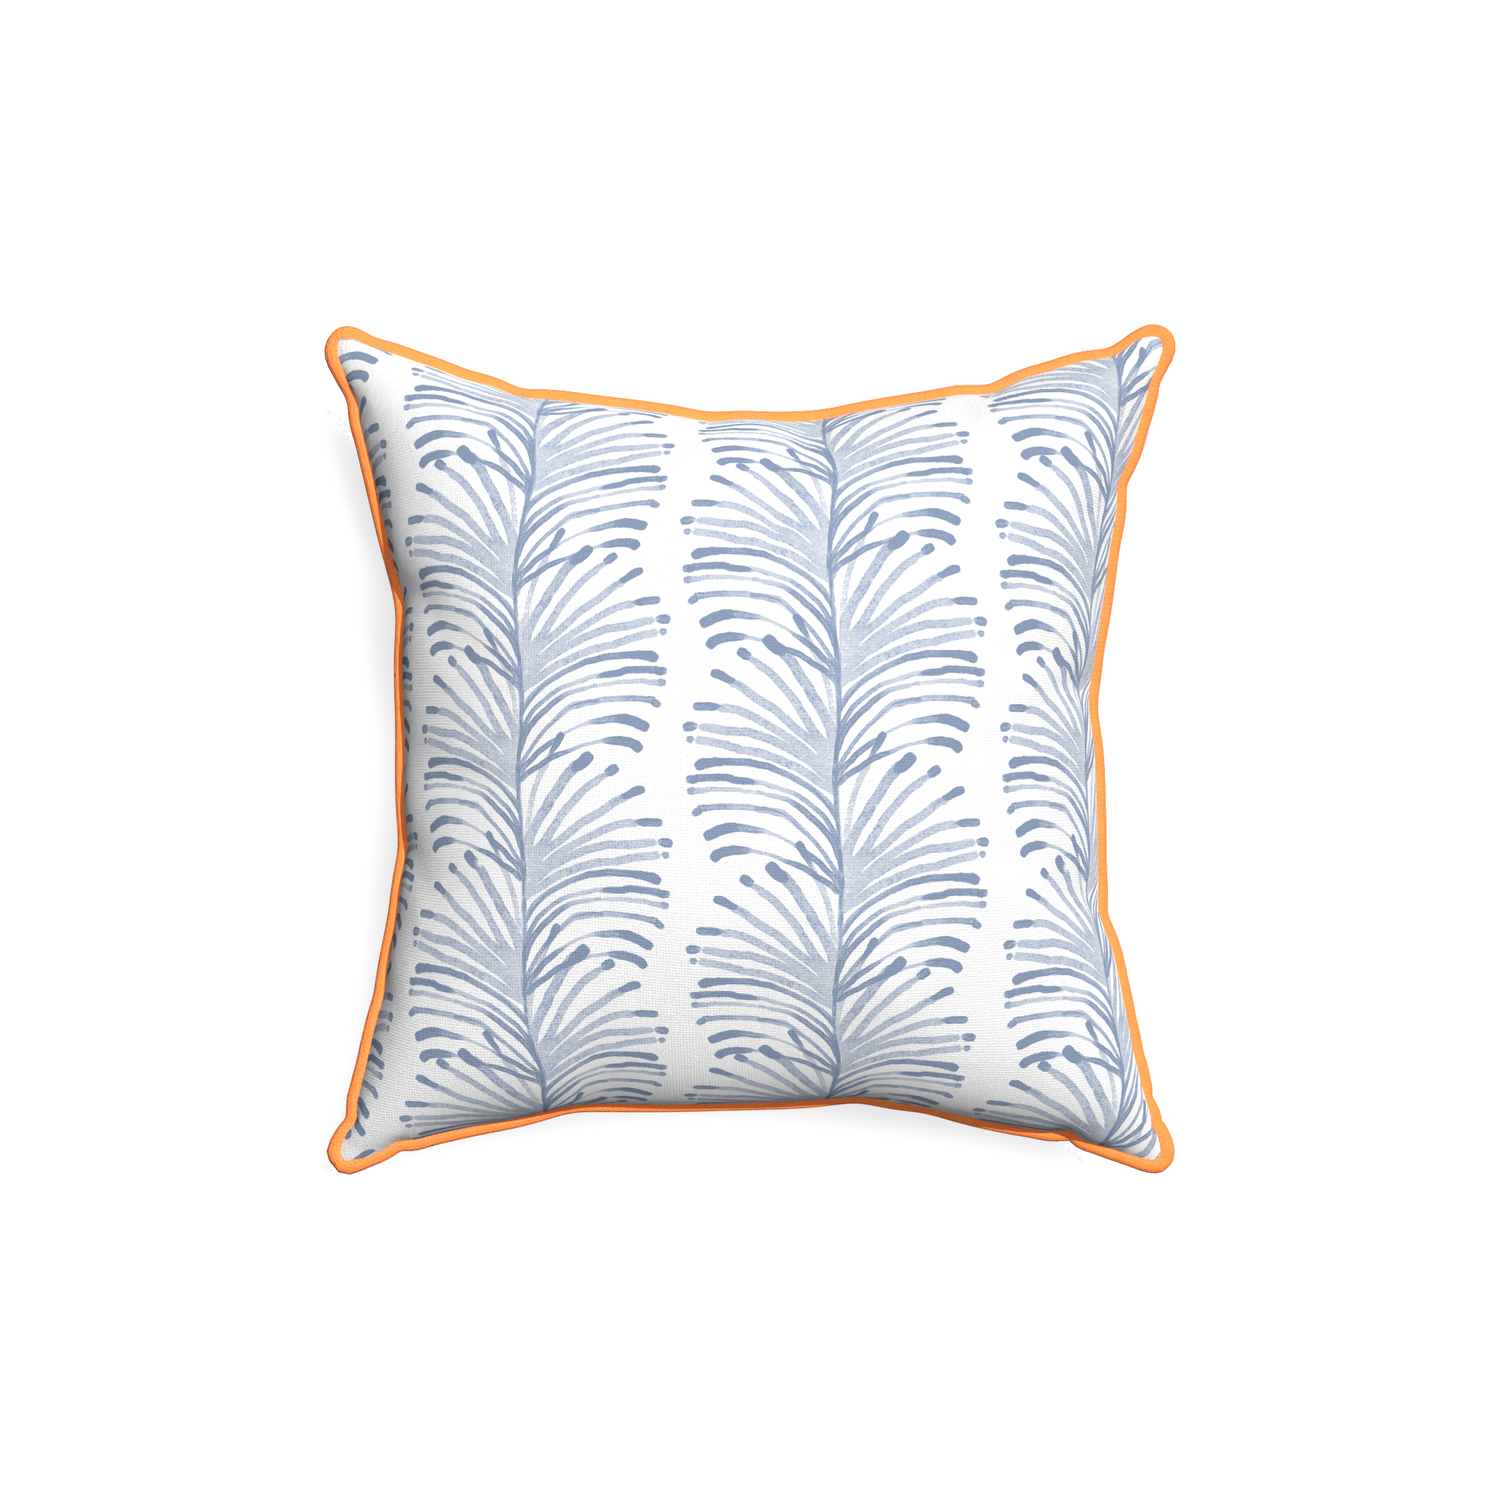 18-square emma sky custom sky blue botanical stripepillow with clementine piping on white background